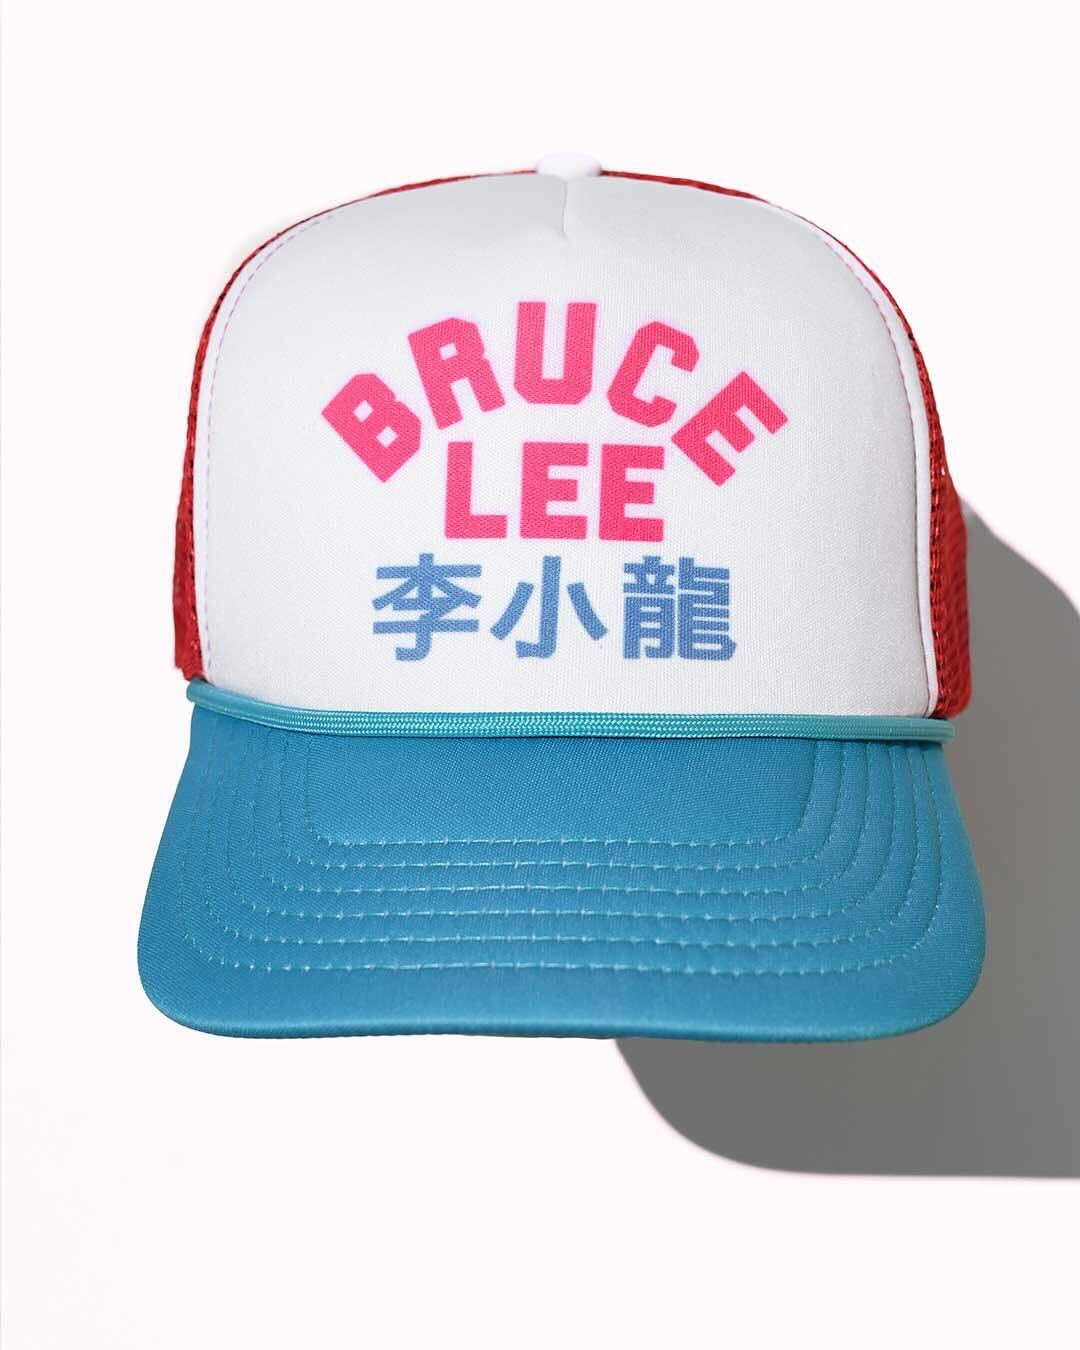 Bruce Lee Trucker Hat - Roots of Fight